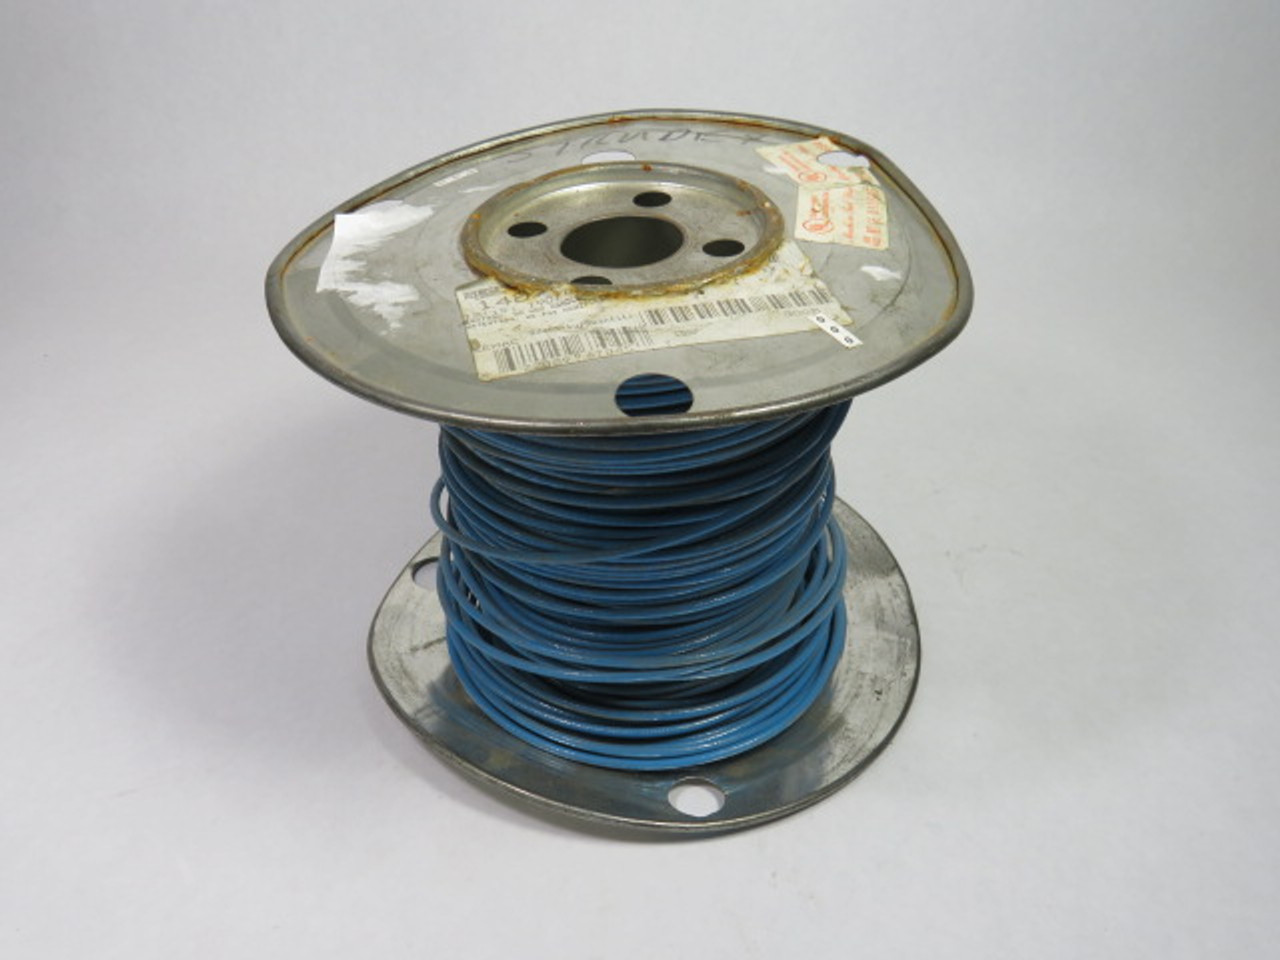 Generic 12/19 Machine Tool Wire 12 Awg 19 Str. 285ft BLUE USED